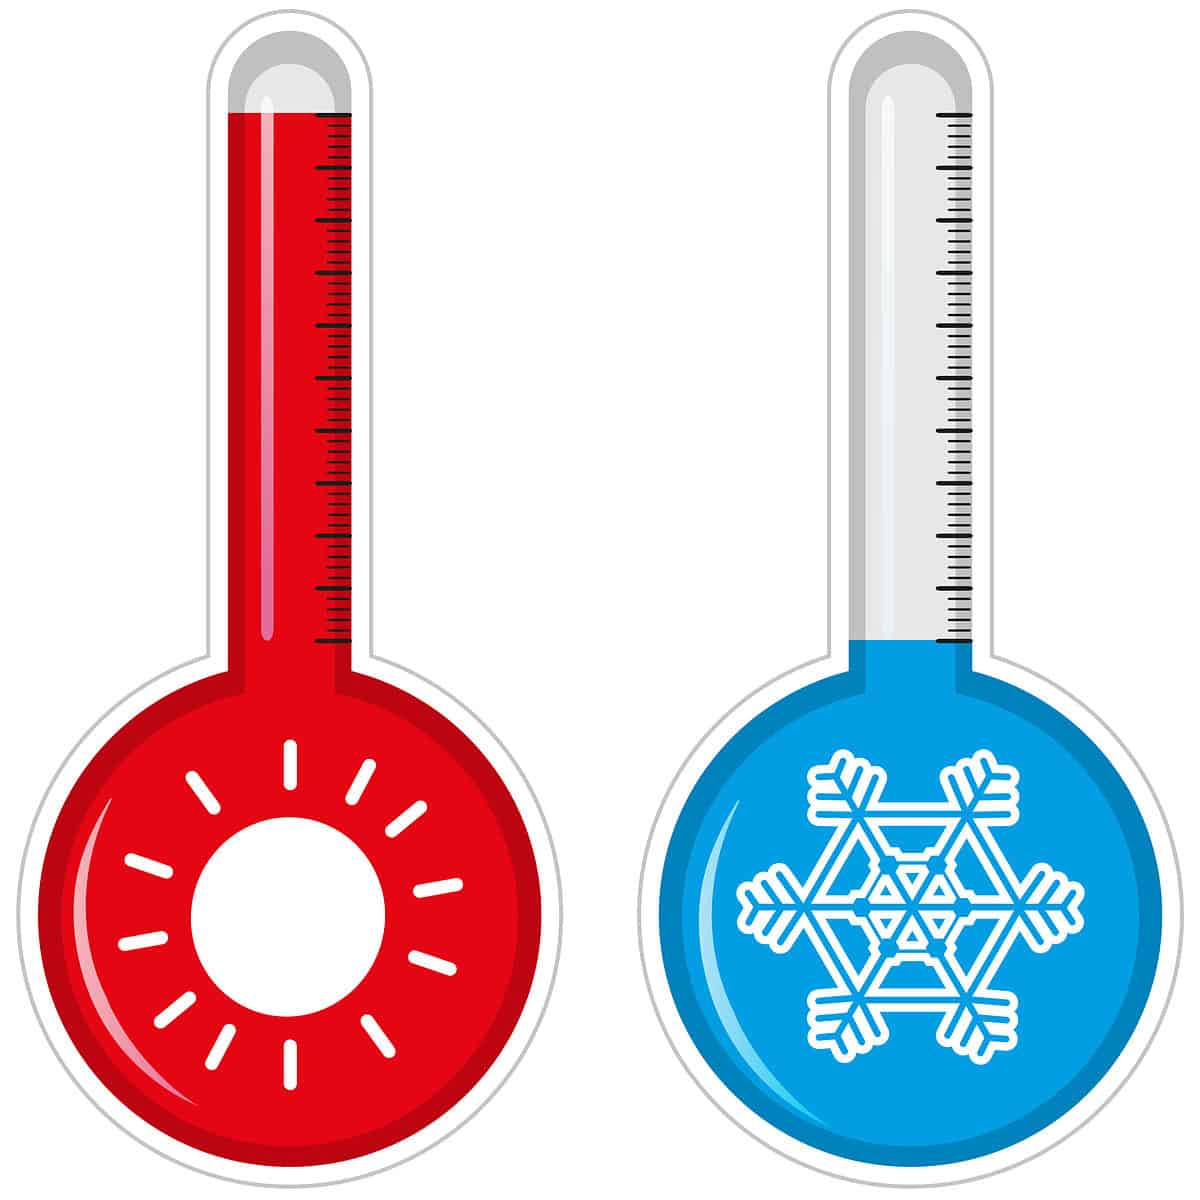 Two thermometers for hot and cold weather